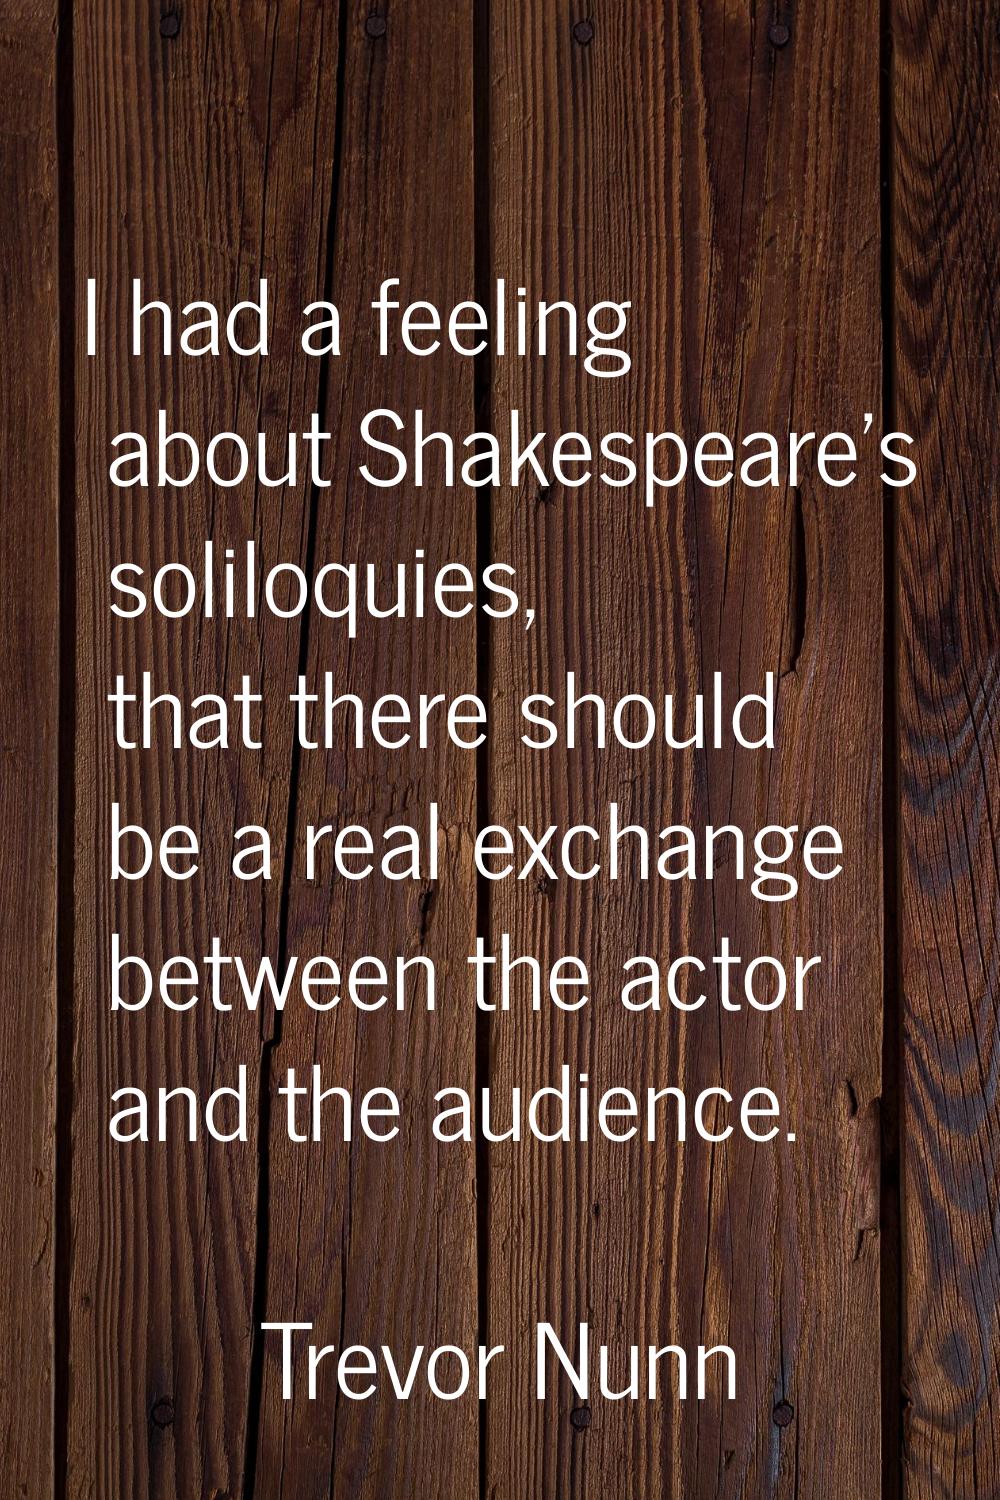 I had a feeling about Shakespeare's soliloquies, that there should be a real exchange between the a